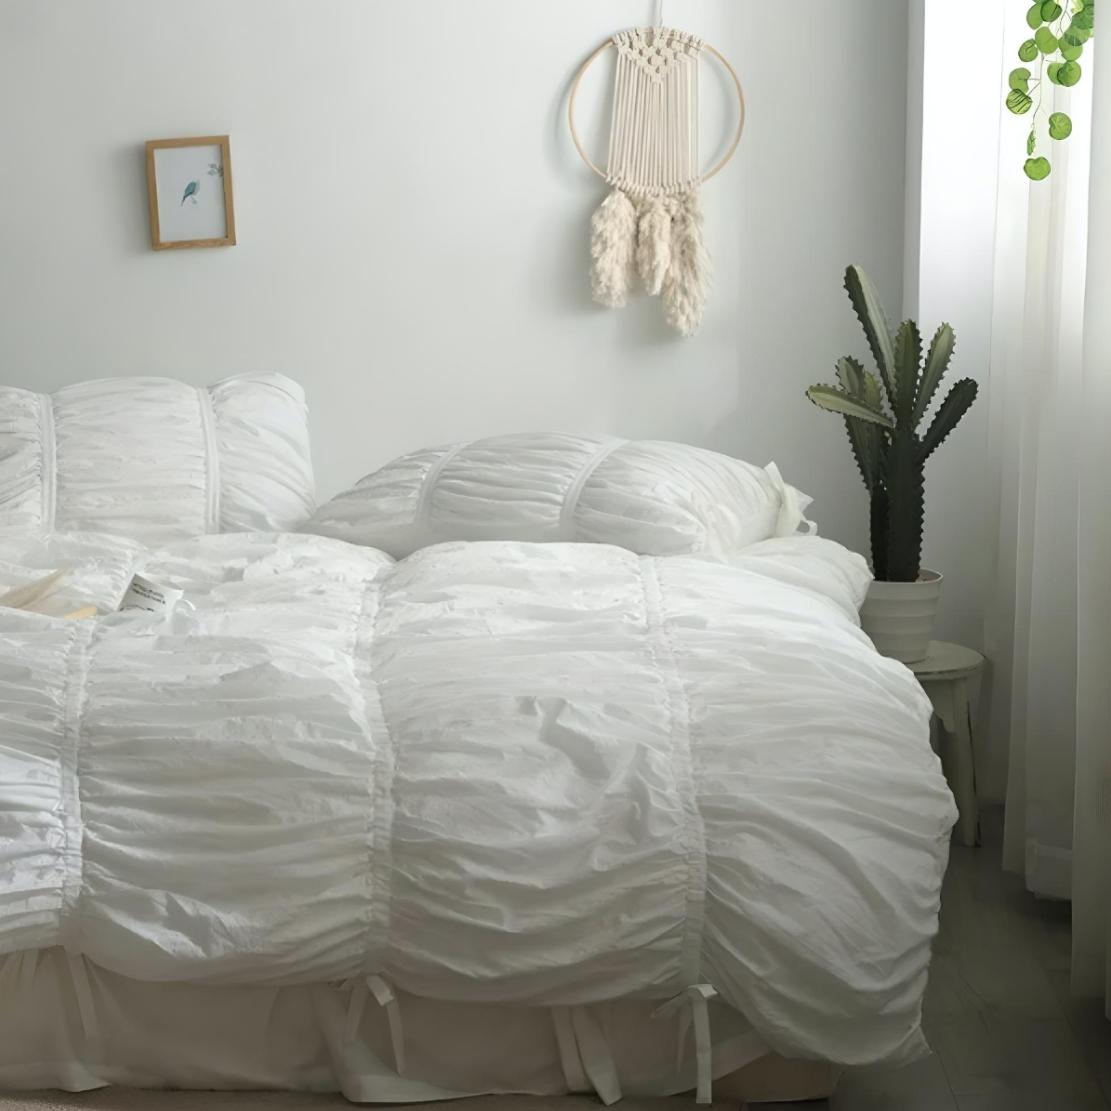 Nordic bedroom with white dreamy bedding set